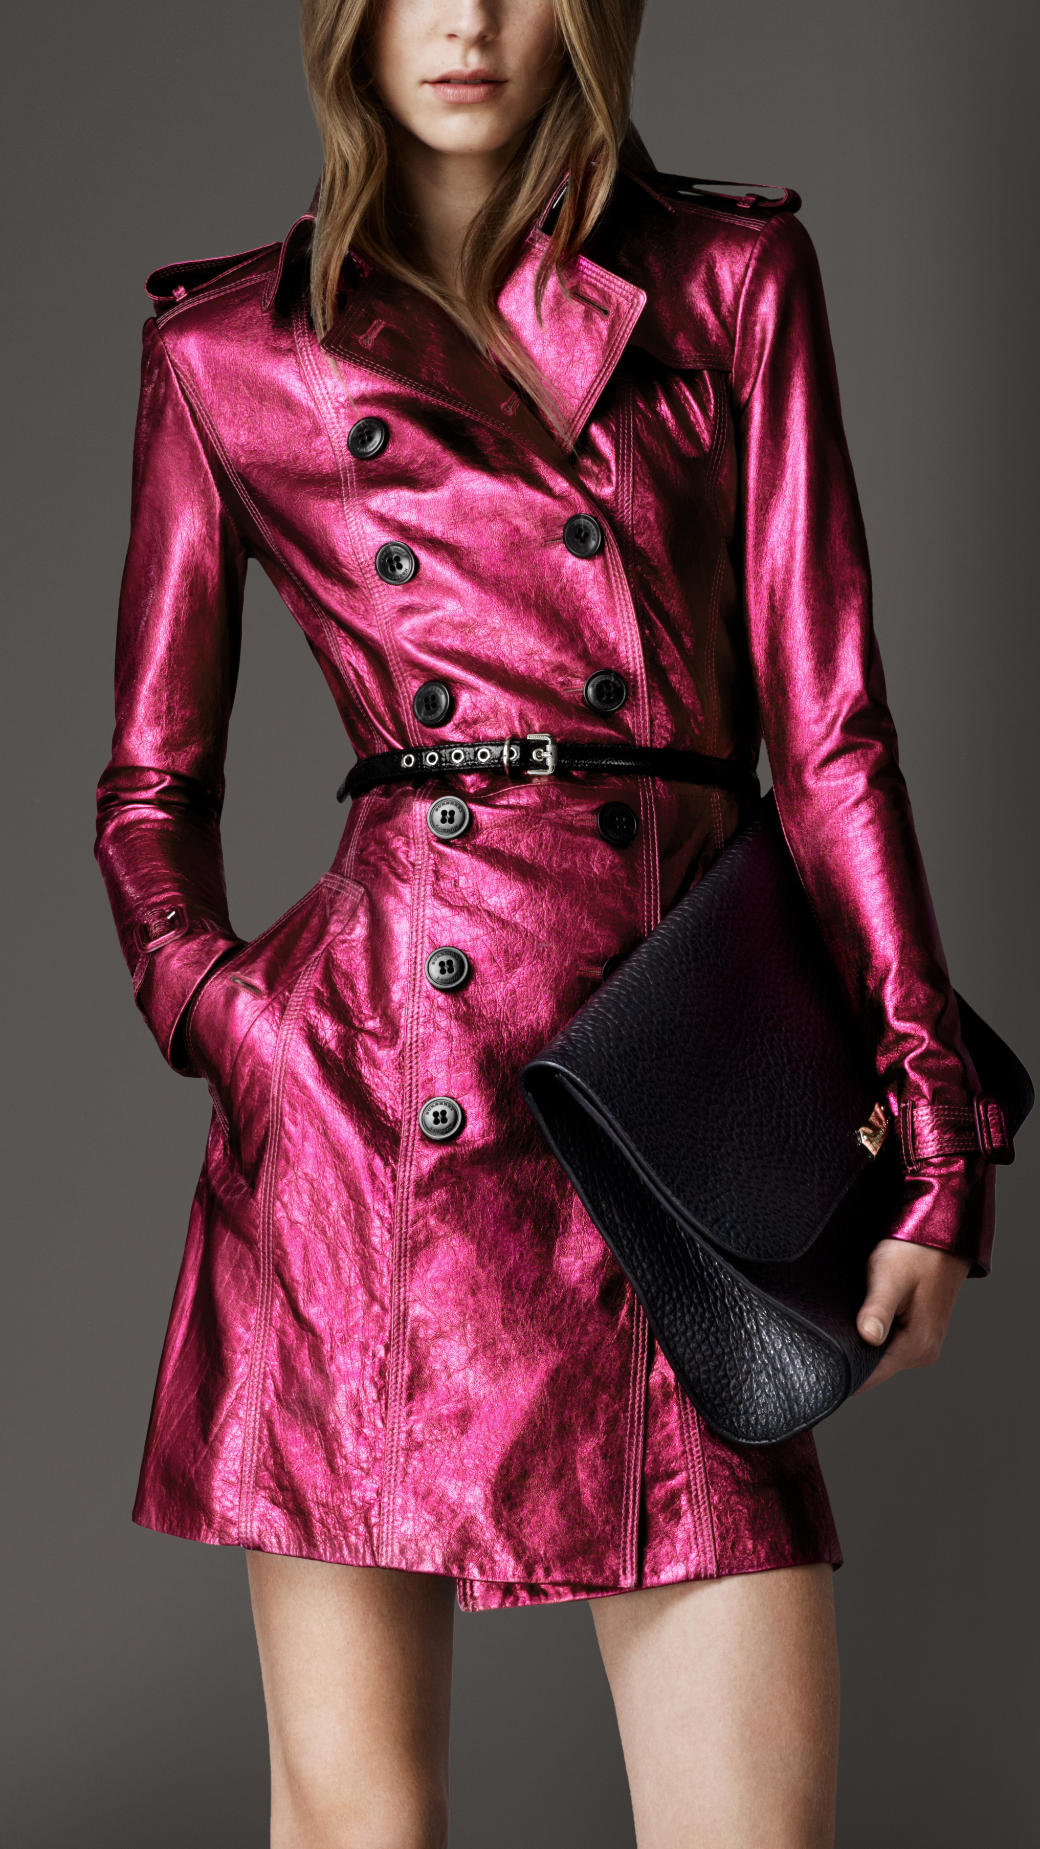 Lyst - Burberry Midlength Metallic Leather Trench Coat in Pink